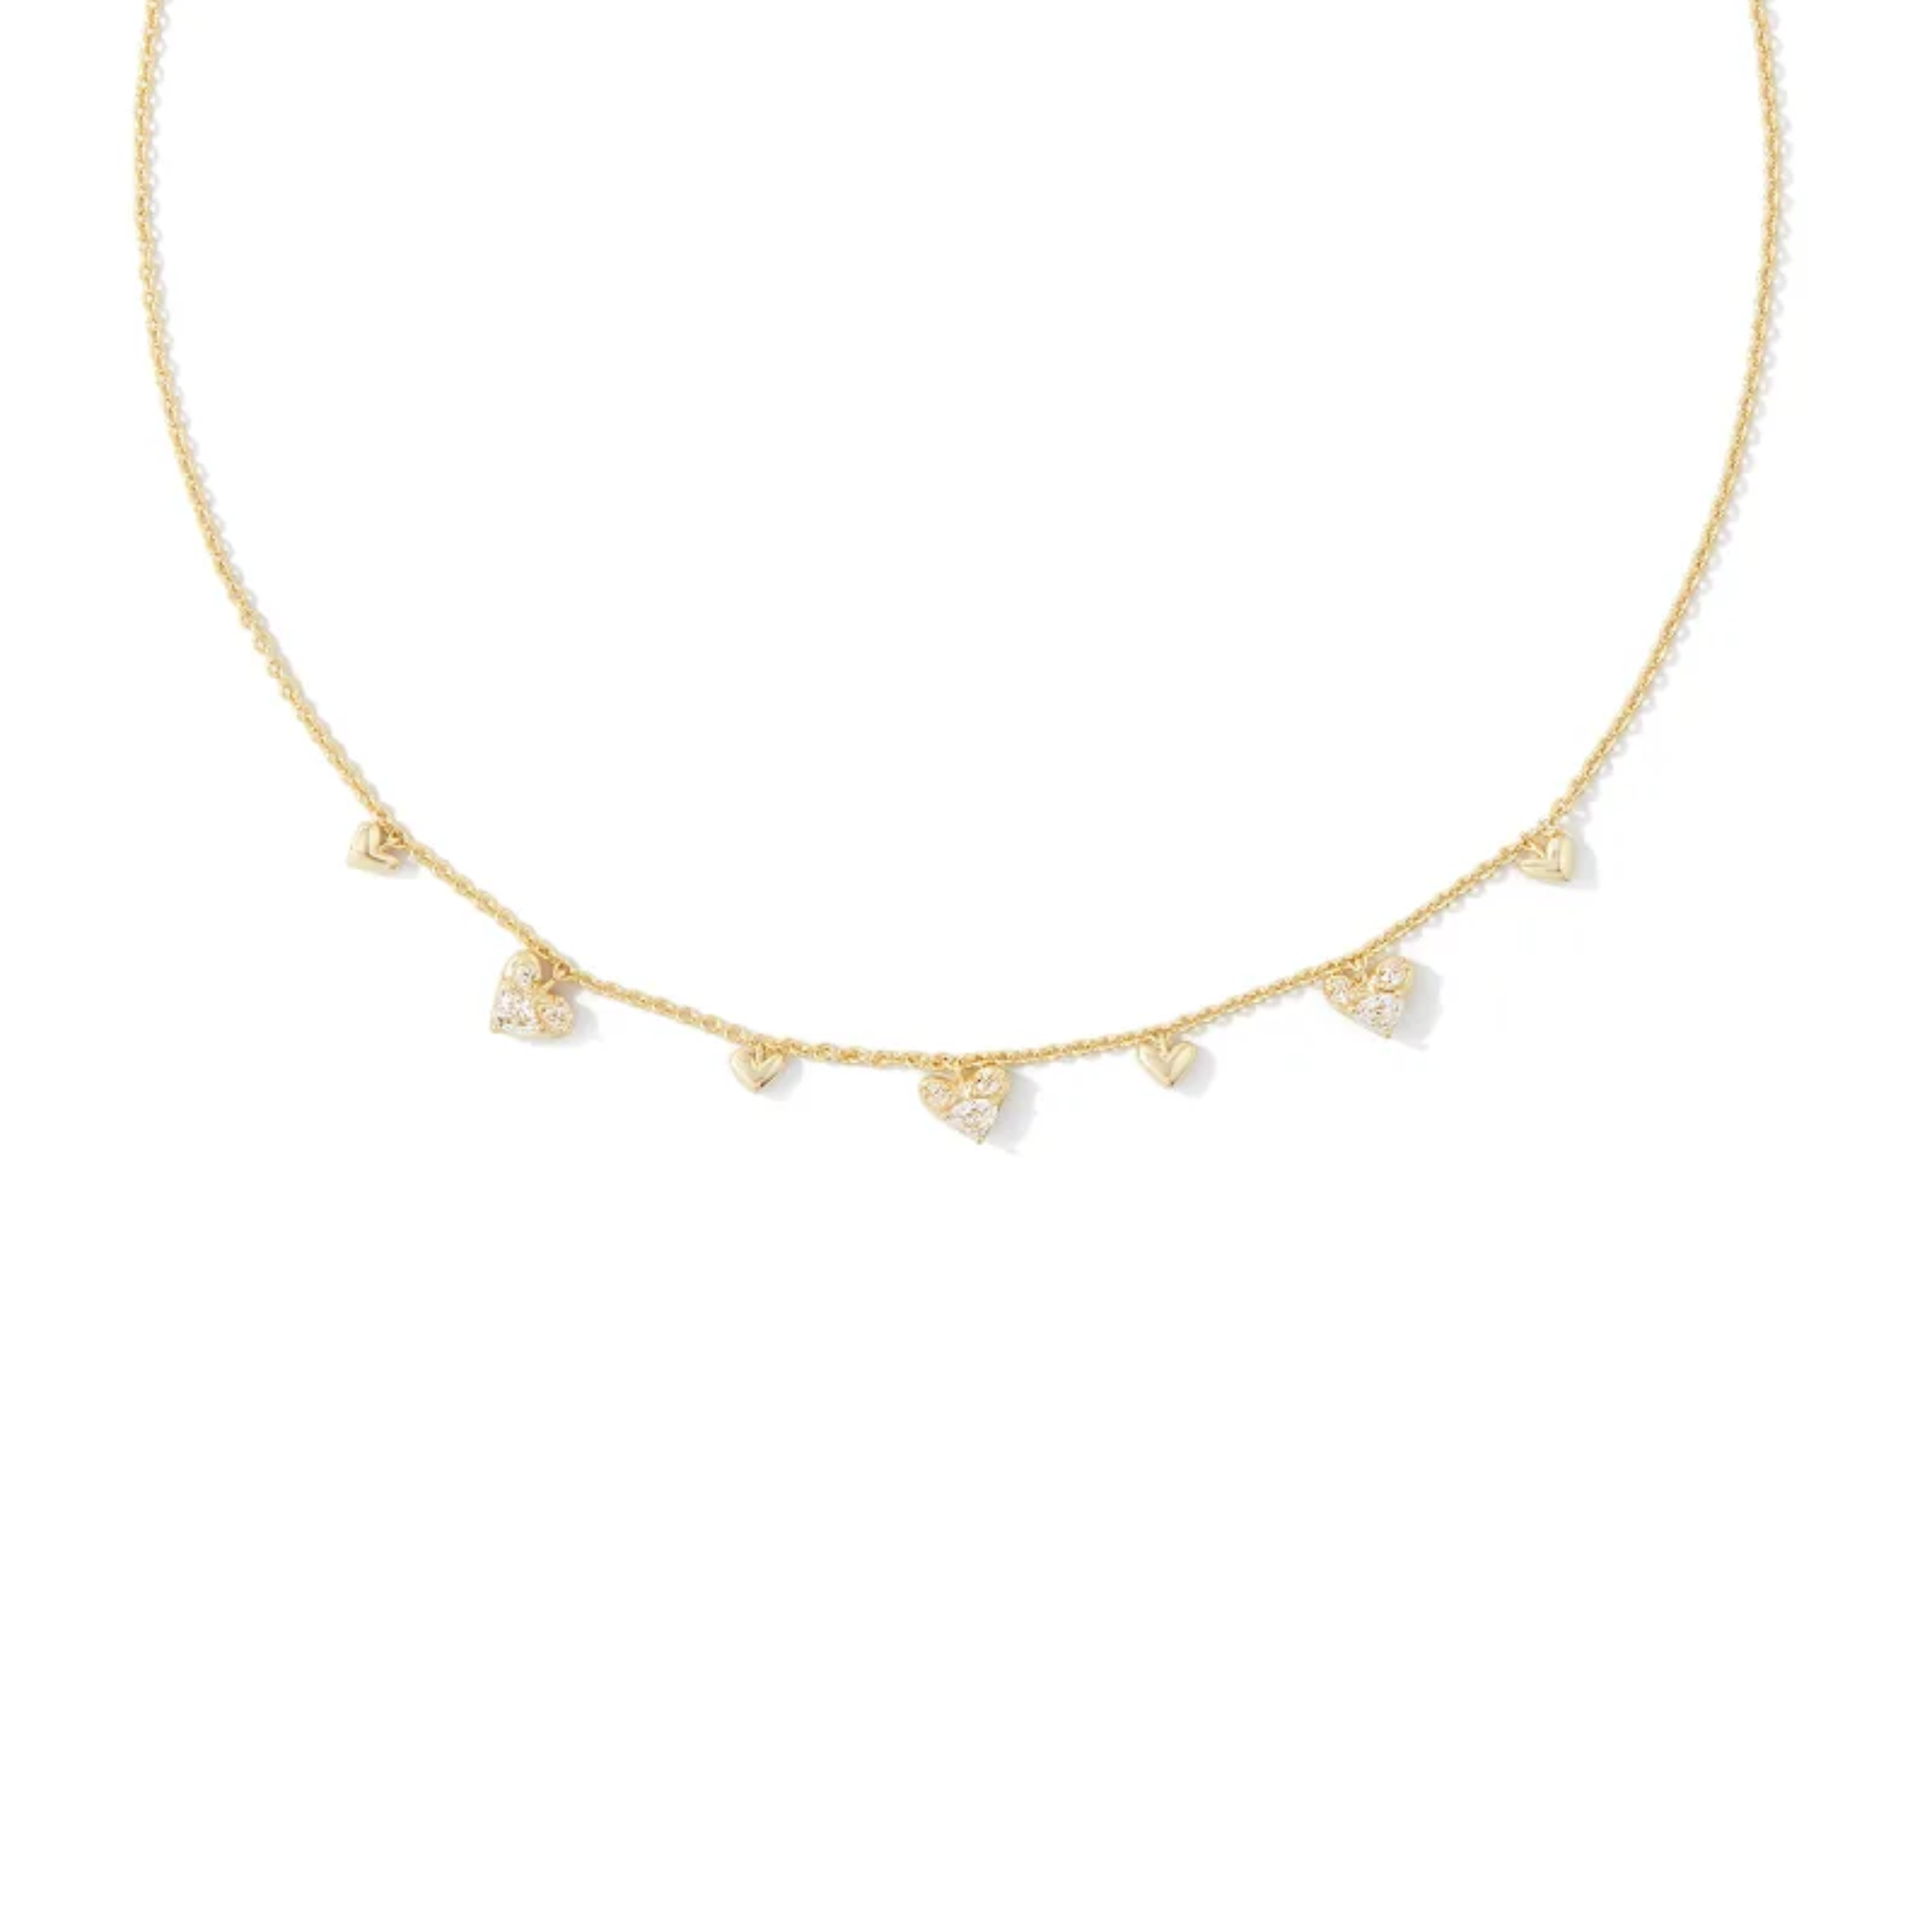 Kendra Scott | Haven Gold Crystal Heart Choker Necklace in White Crystal - Giddy Up Glamour Boutique